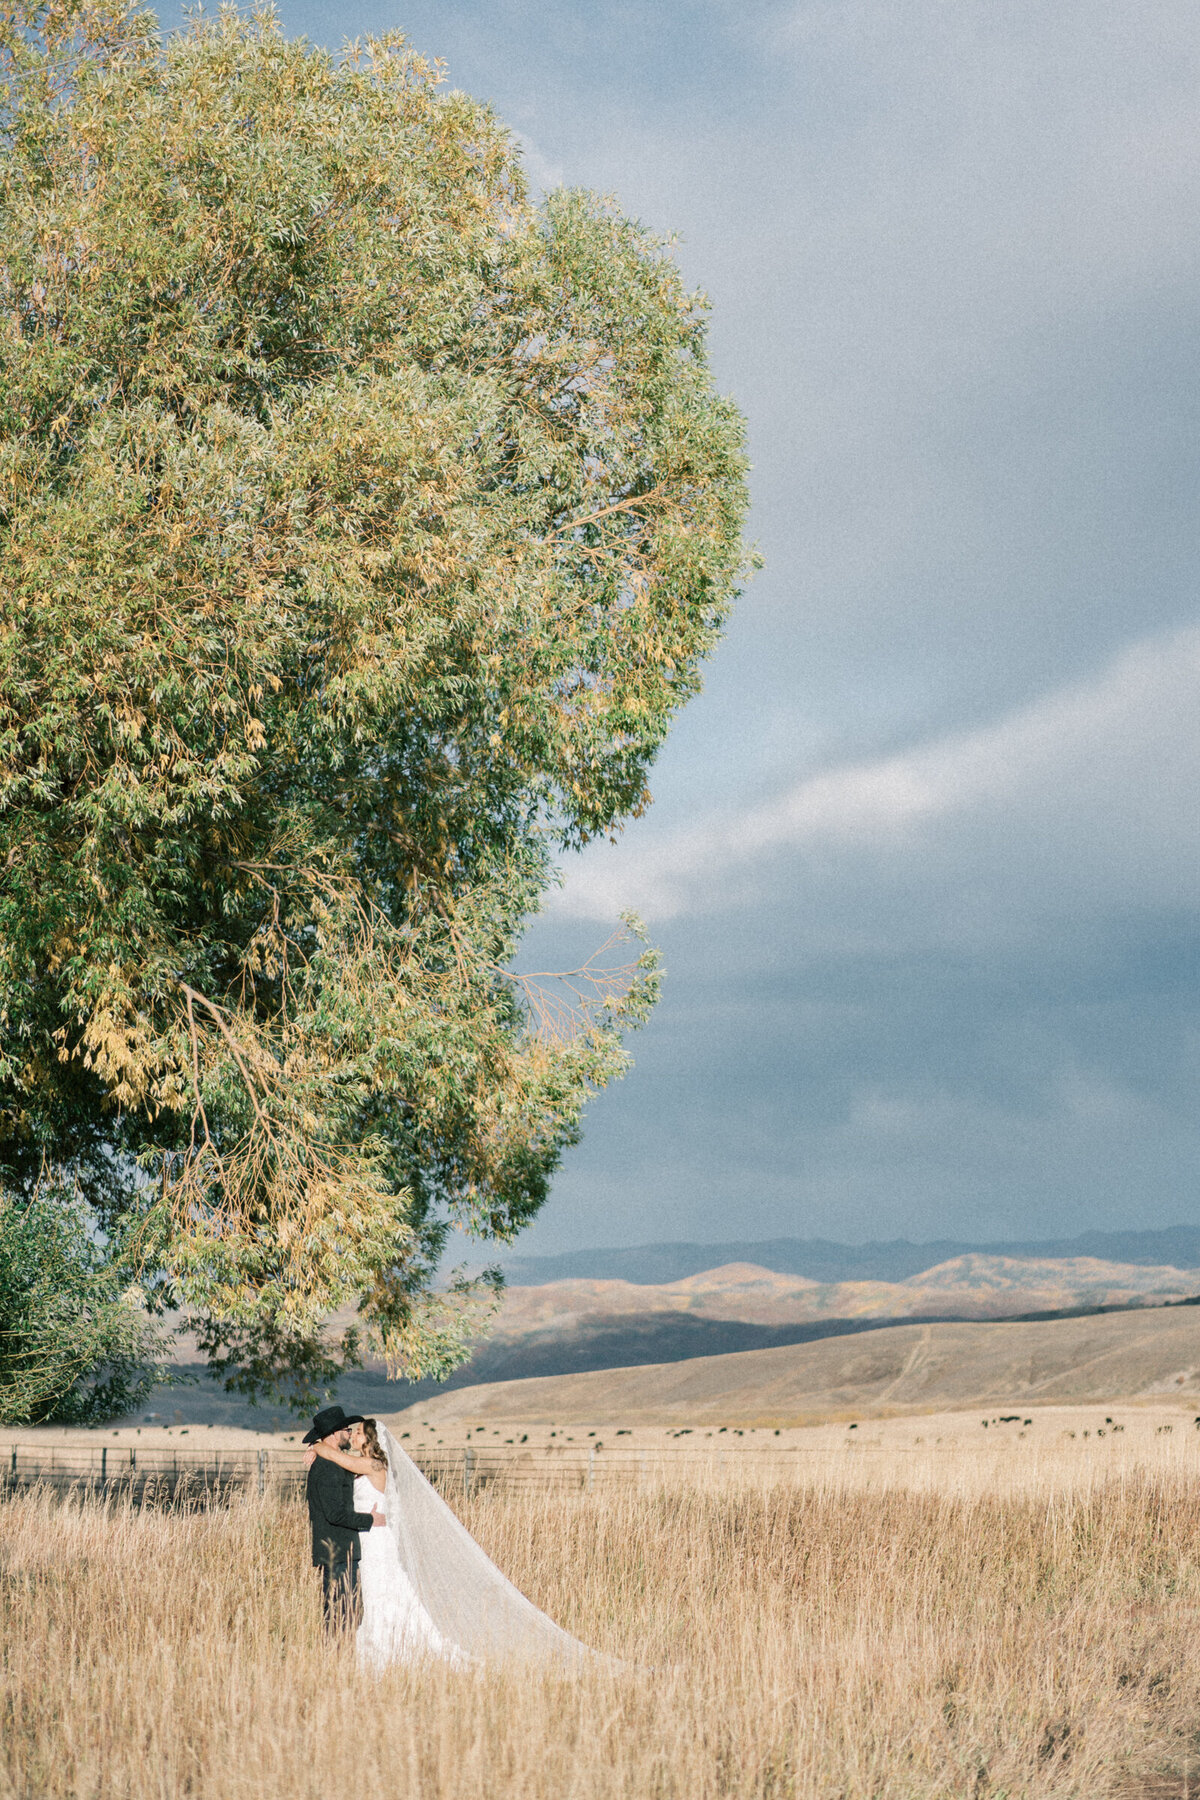 Steamboat_Springs_Ranch_wedding_Mary_Ann_craddock_photography_0047